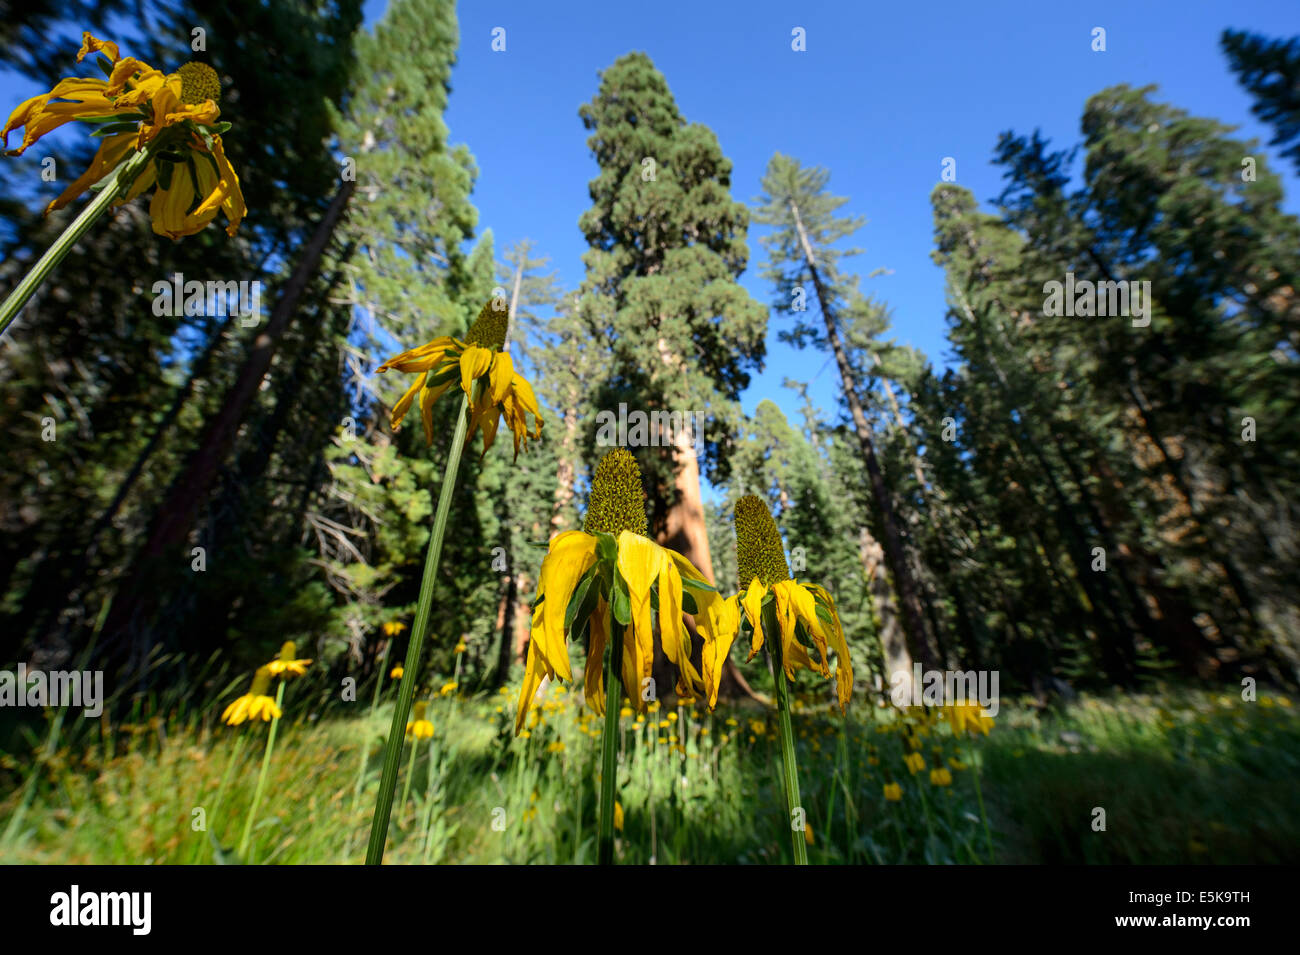 Cone flowers in the Mariposa Grove of Giant Sequoia Trees, Yosemite National Park Stock Photo